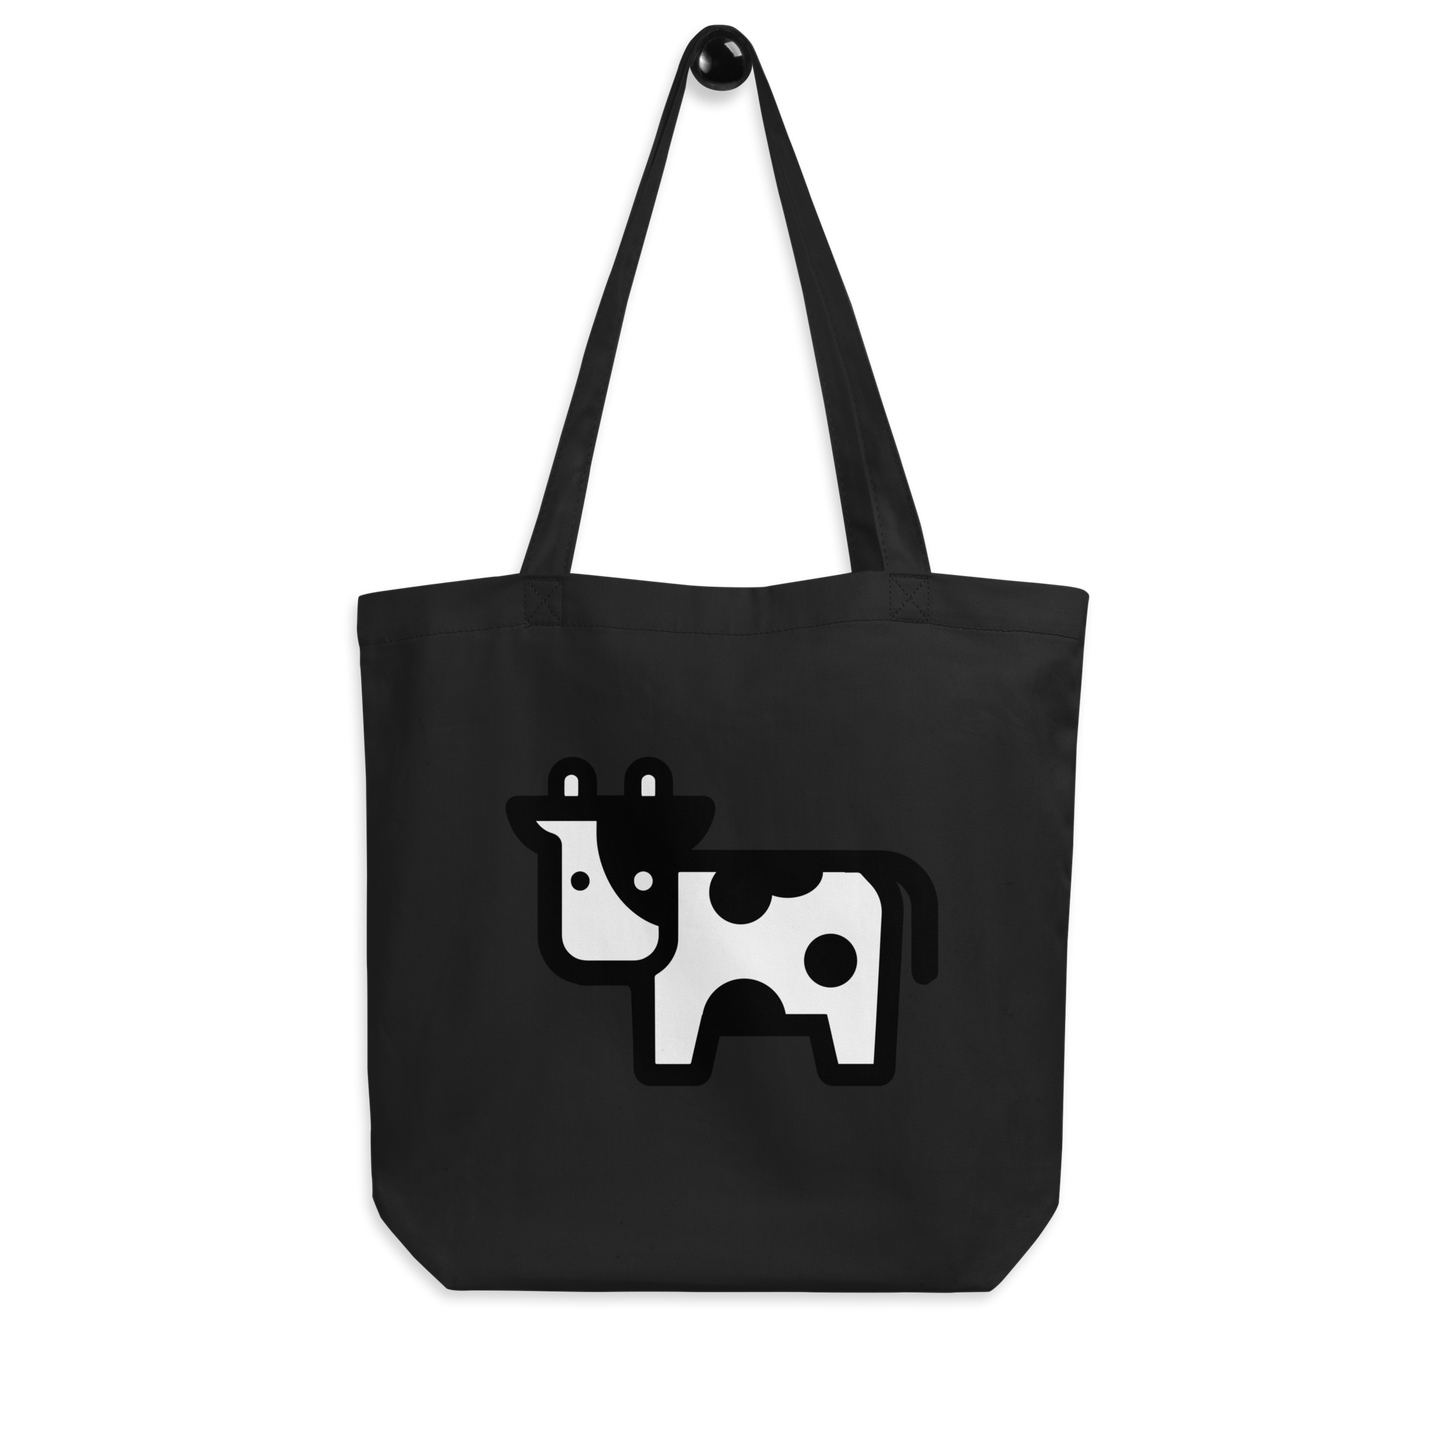 The Beefy Cow Tote Bag